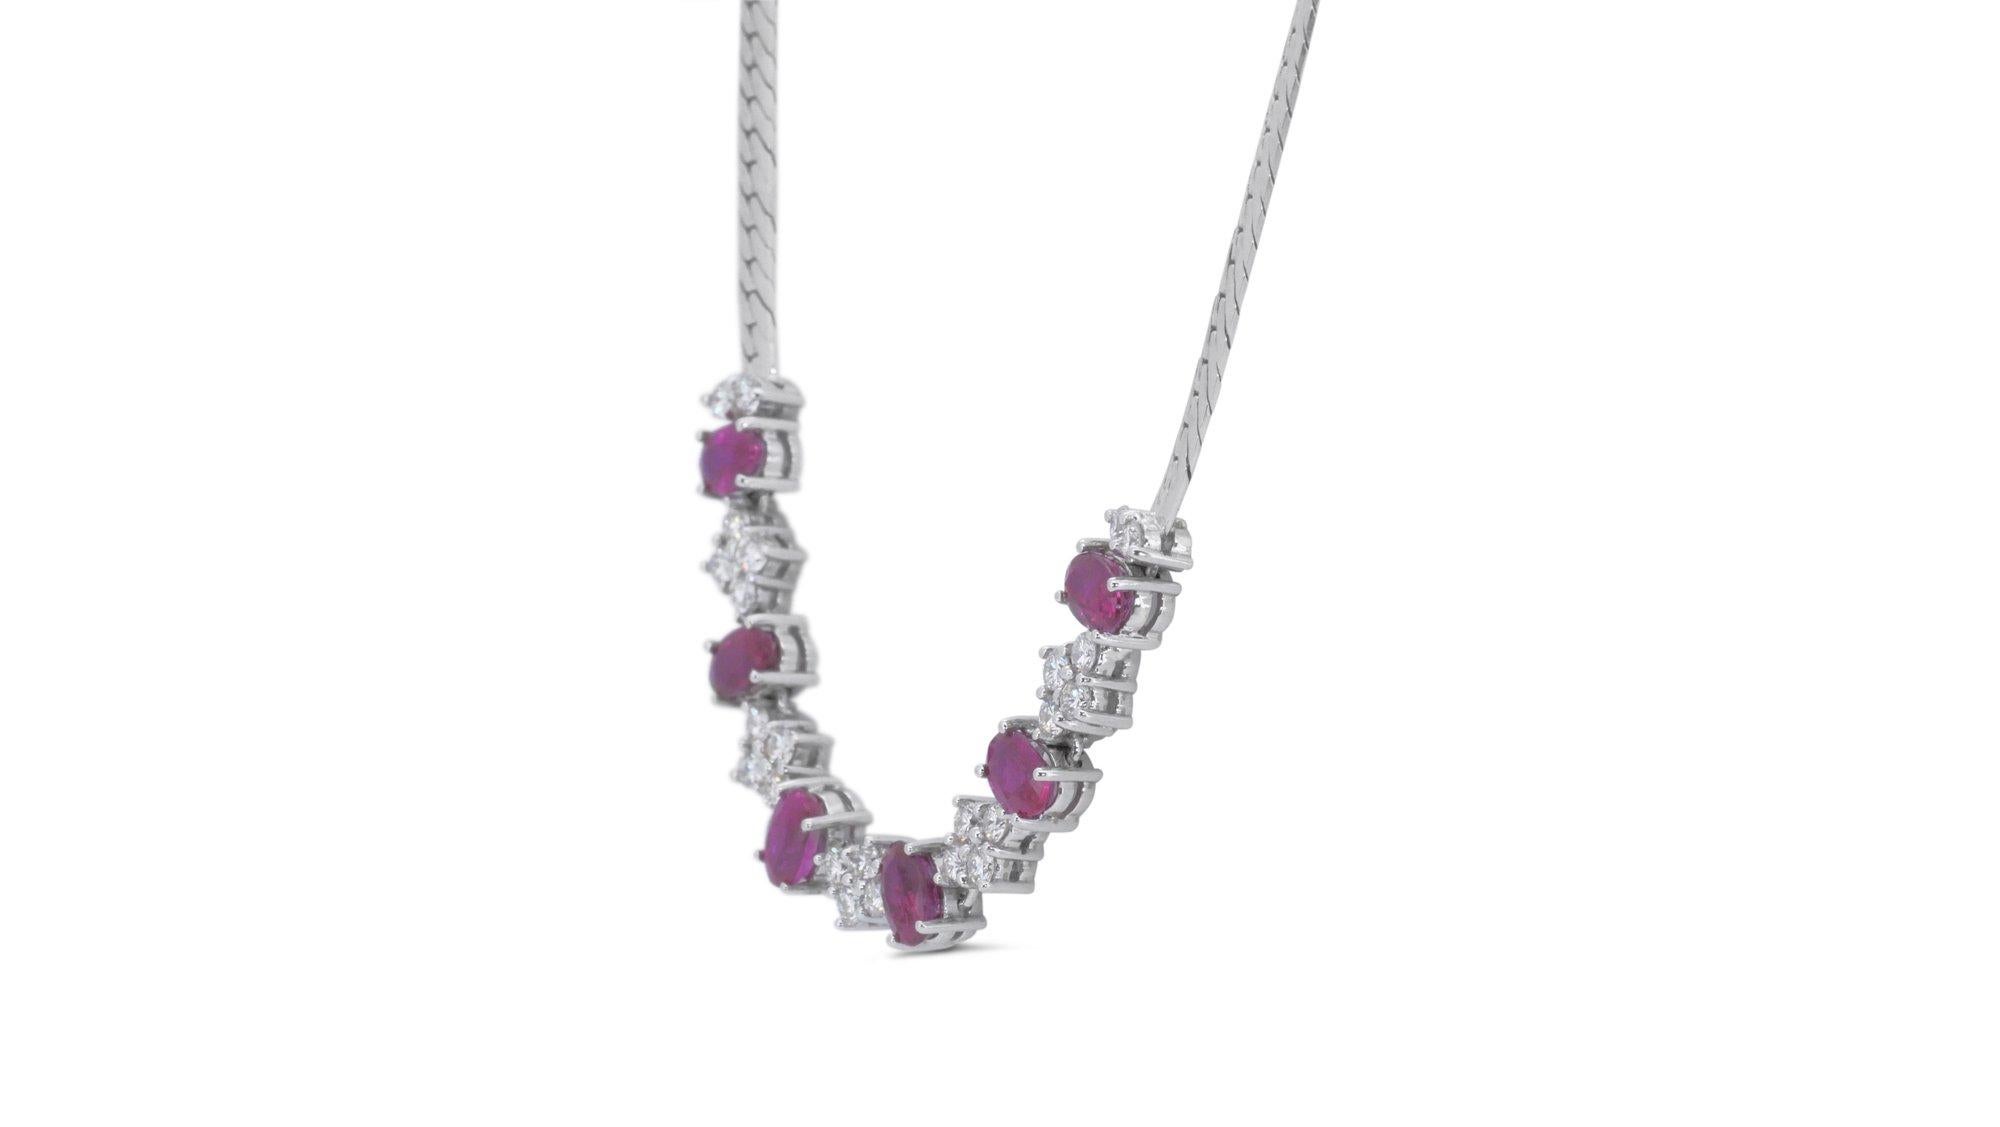 Mixed Cut Dazzling 18k White Gold Necklace w/ 2.85ct Rubies and Natural Diamonds IGI Cert